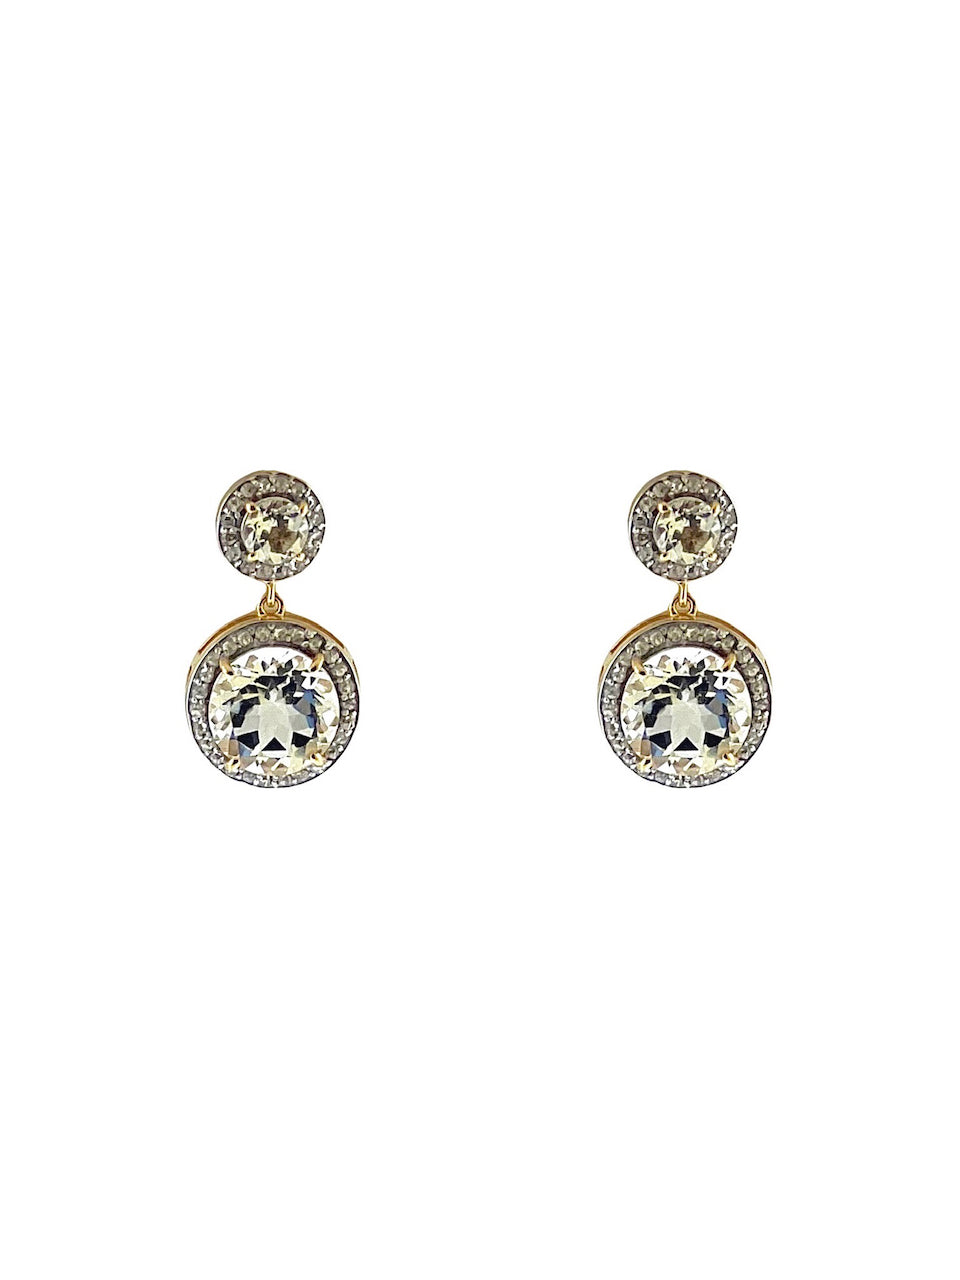 Pave Diamonds around White Topaz 22kt Gold and Brass Drop Earrings